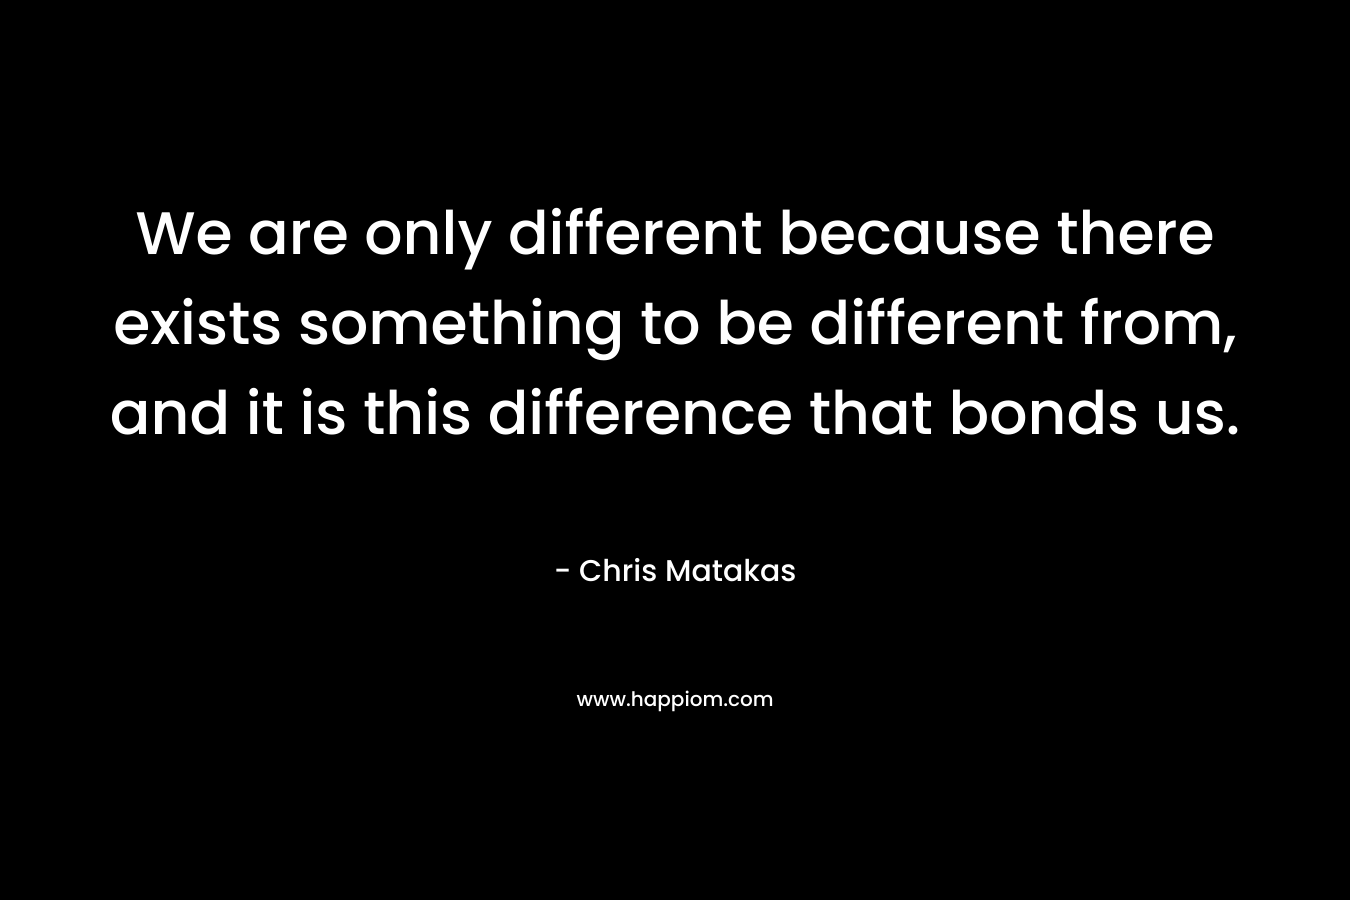 We are only different because there exists something to be different from, and it is this difference that bonds us. – Chris Matakas